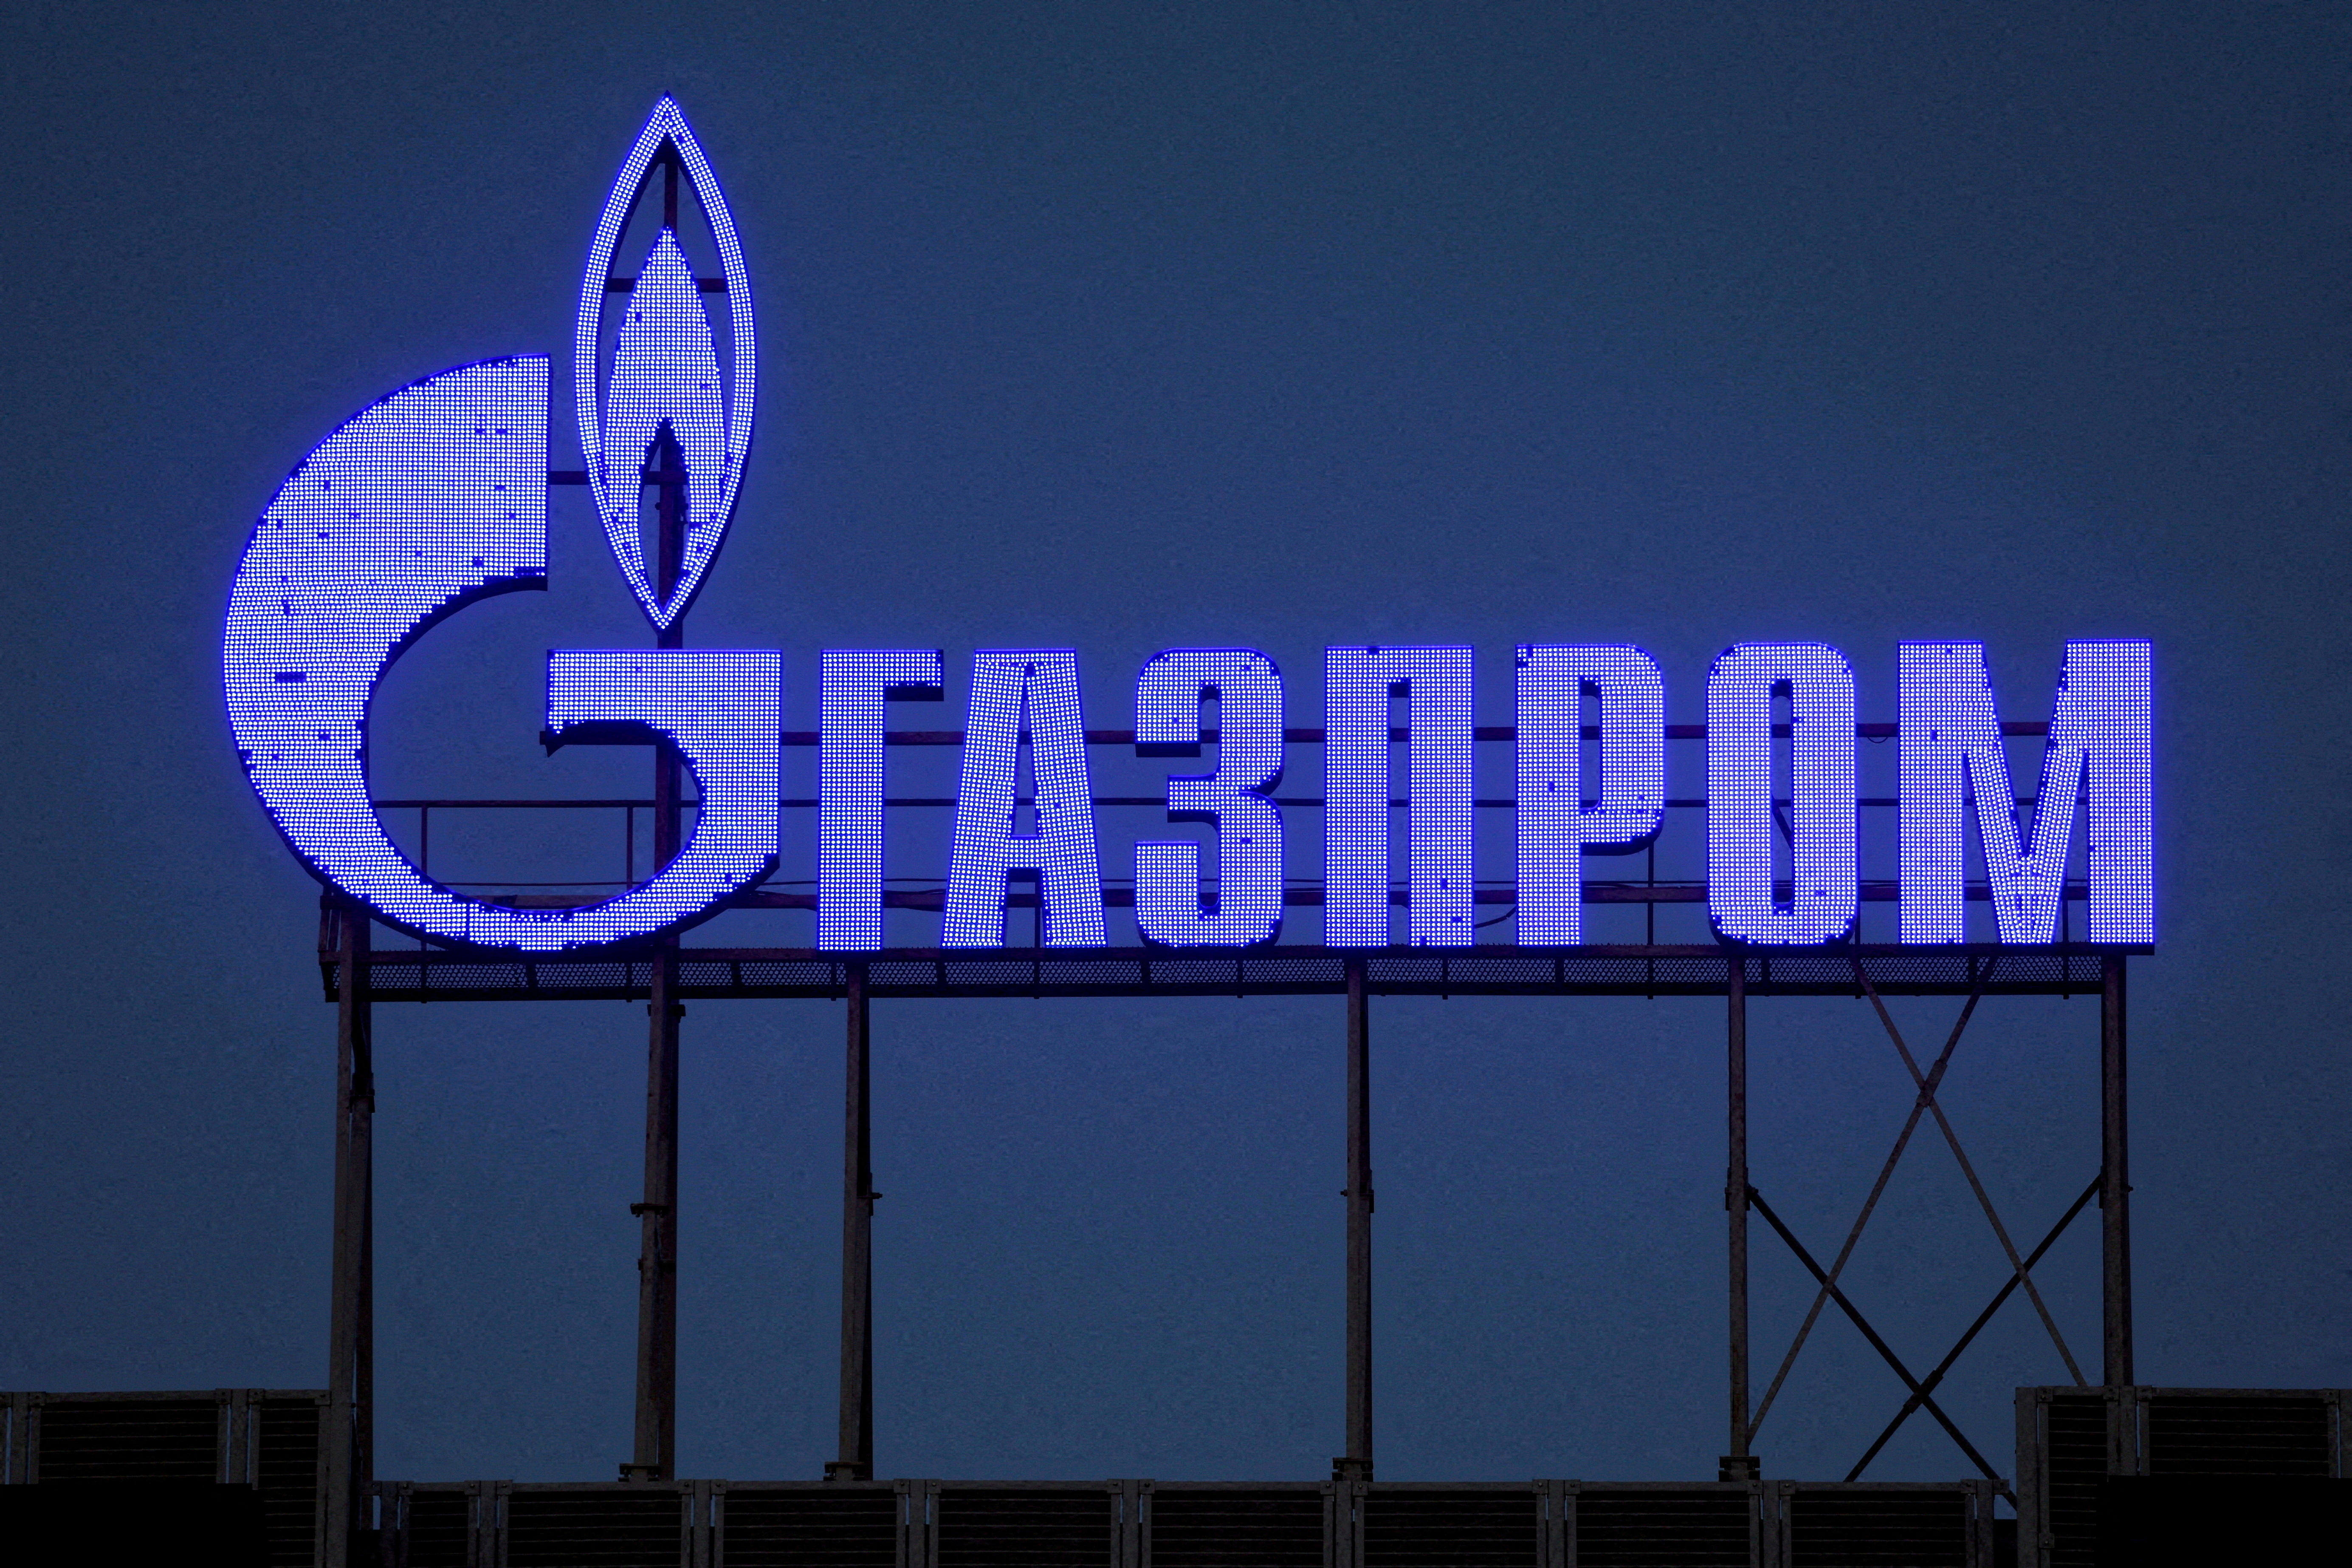 A Gazprom sign is seen on the facade of a business centre in Saint Petersburg